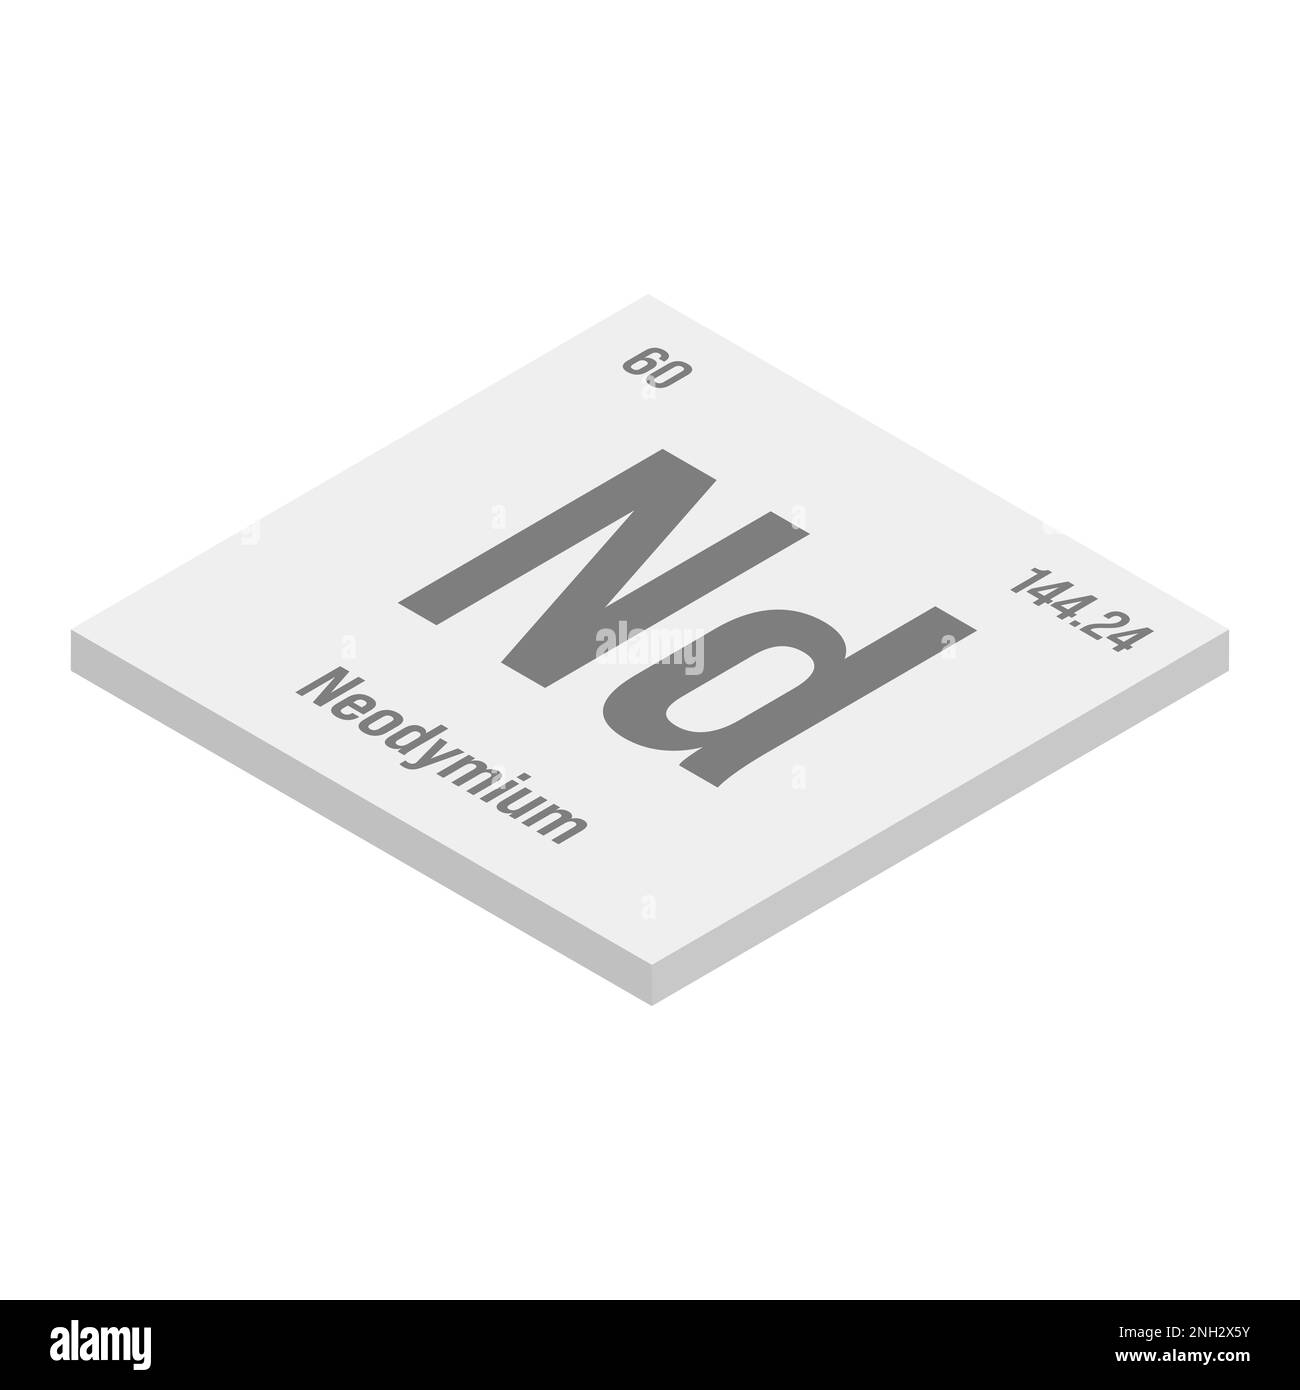 Neodymium, Nd, gray 3D isometric illustration of periodic table element with name, symbol, atomic number and weight. Rare earth metal with various industrial uses, such as in magnets, lasers, and as a component in certain types of glass. Stock Vector